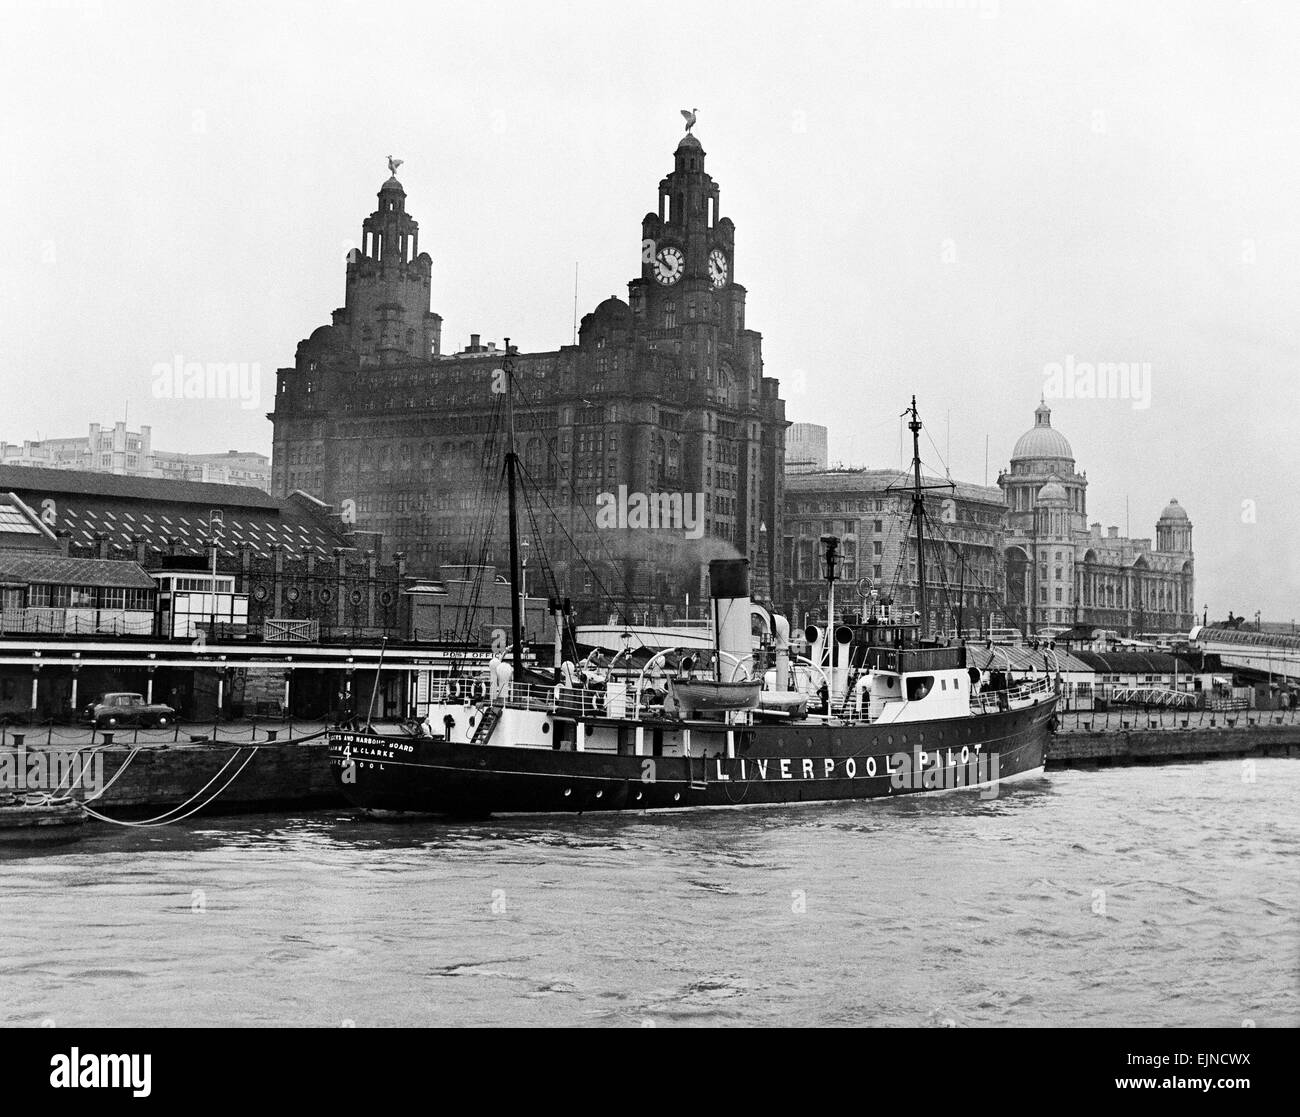 Views of Liverpool, Merseyside, 13th May 1954. Docks and Harbour Board Pilot Ship in dock next to their offices, the Royal Liver Building and the Cunard Building. Life in the Mirror Series. Stock Photo